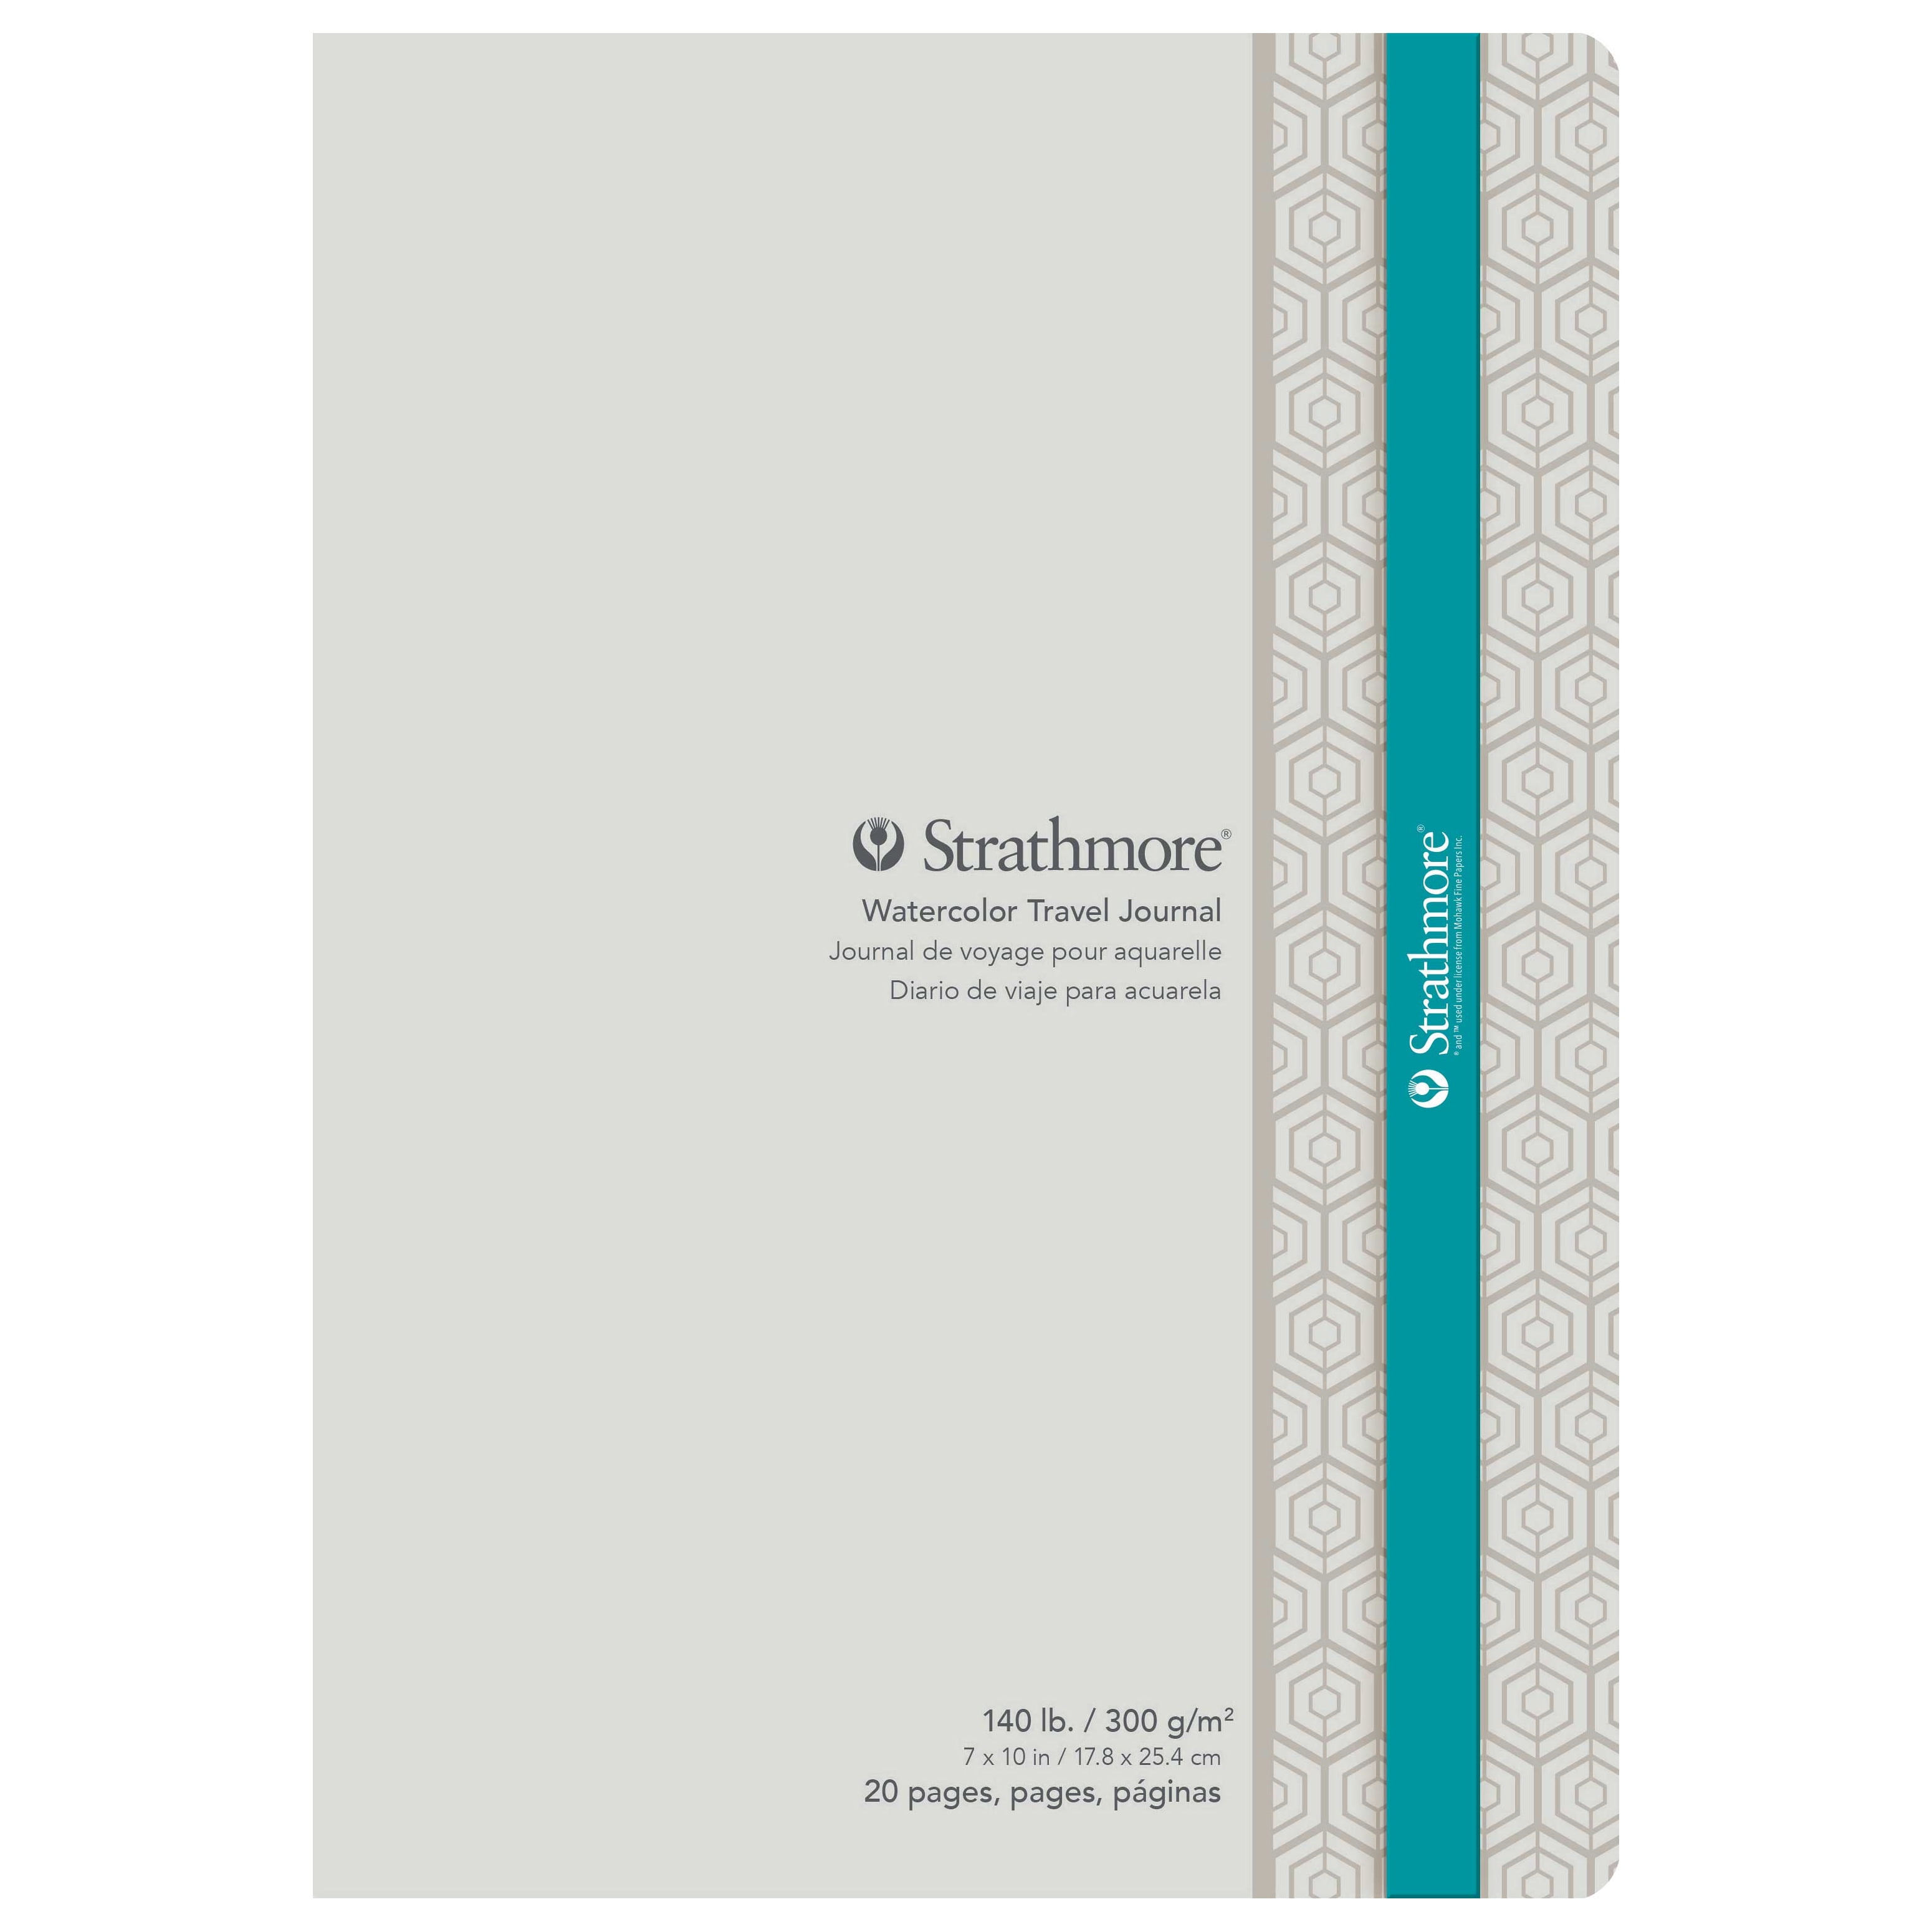 Strathmore Watercolor Travel Journal 7x10